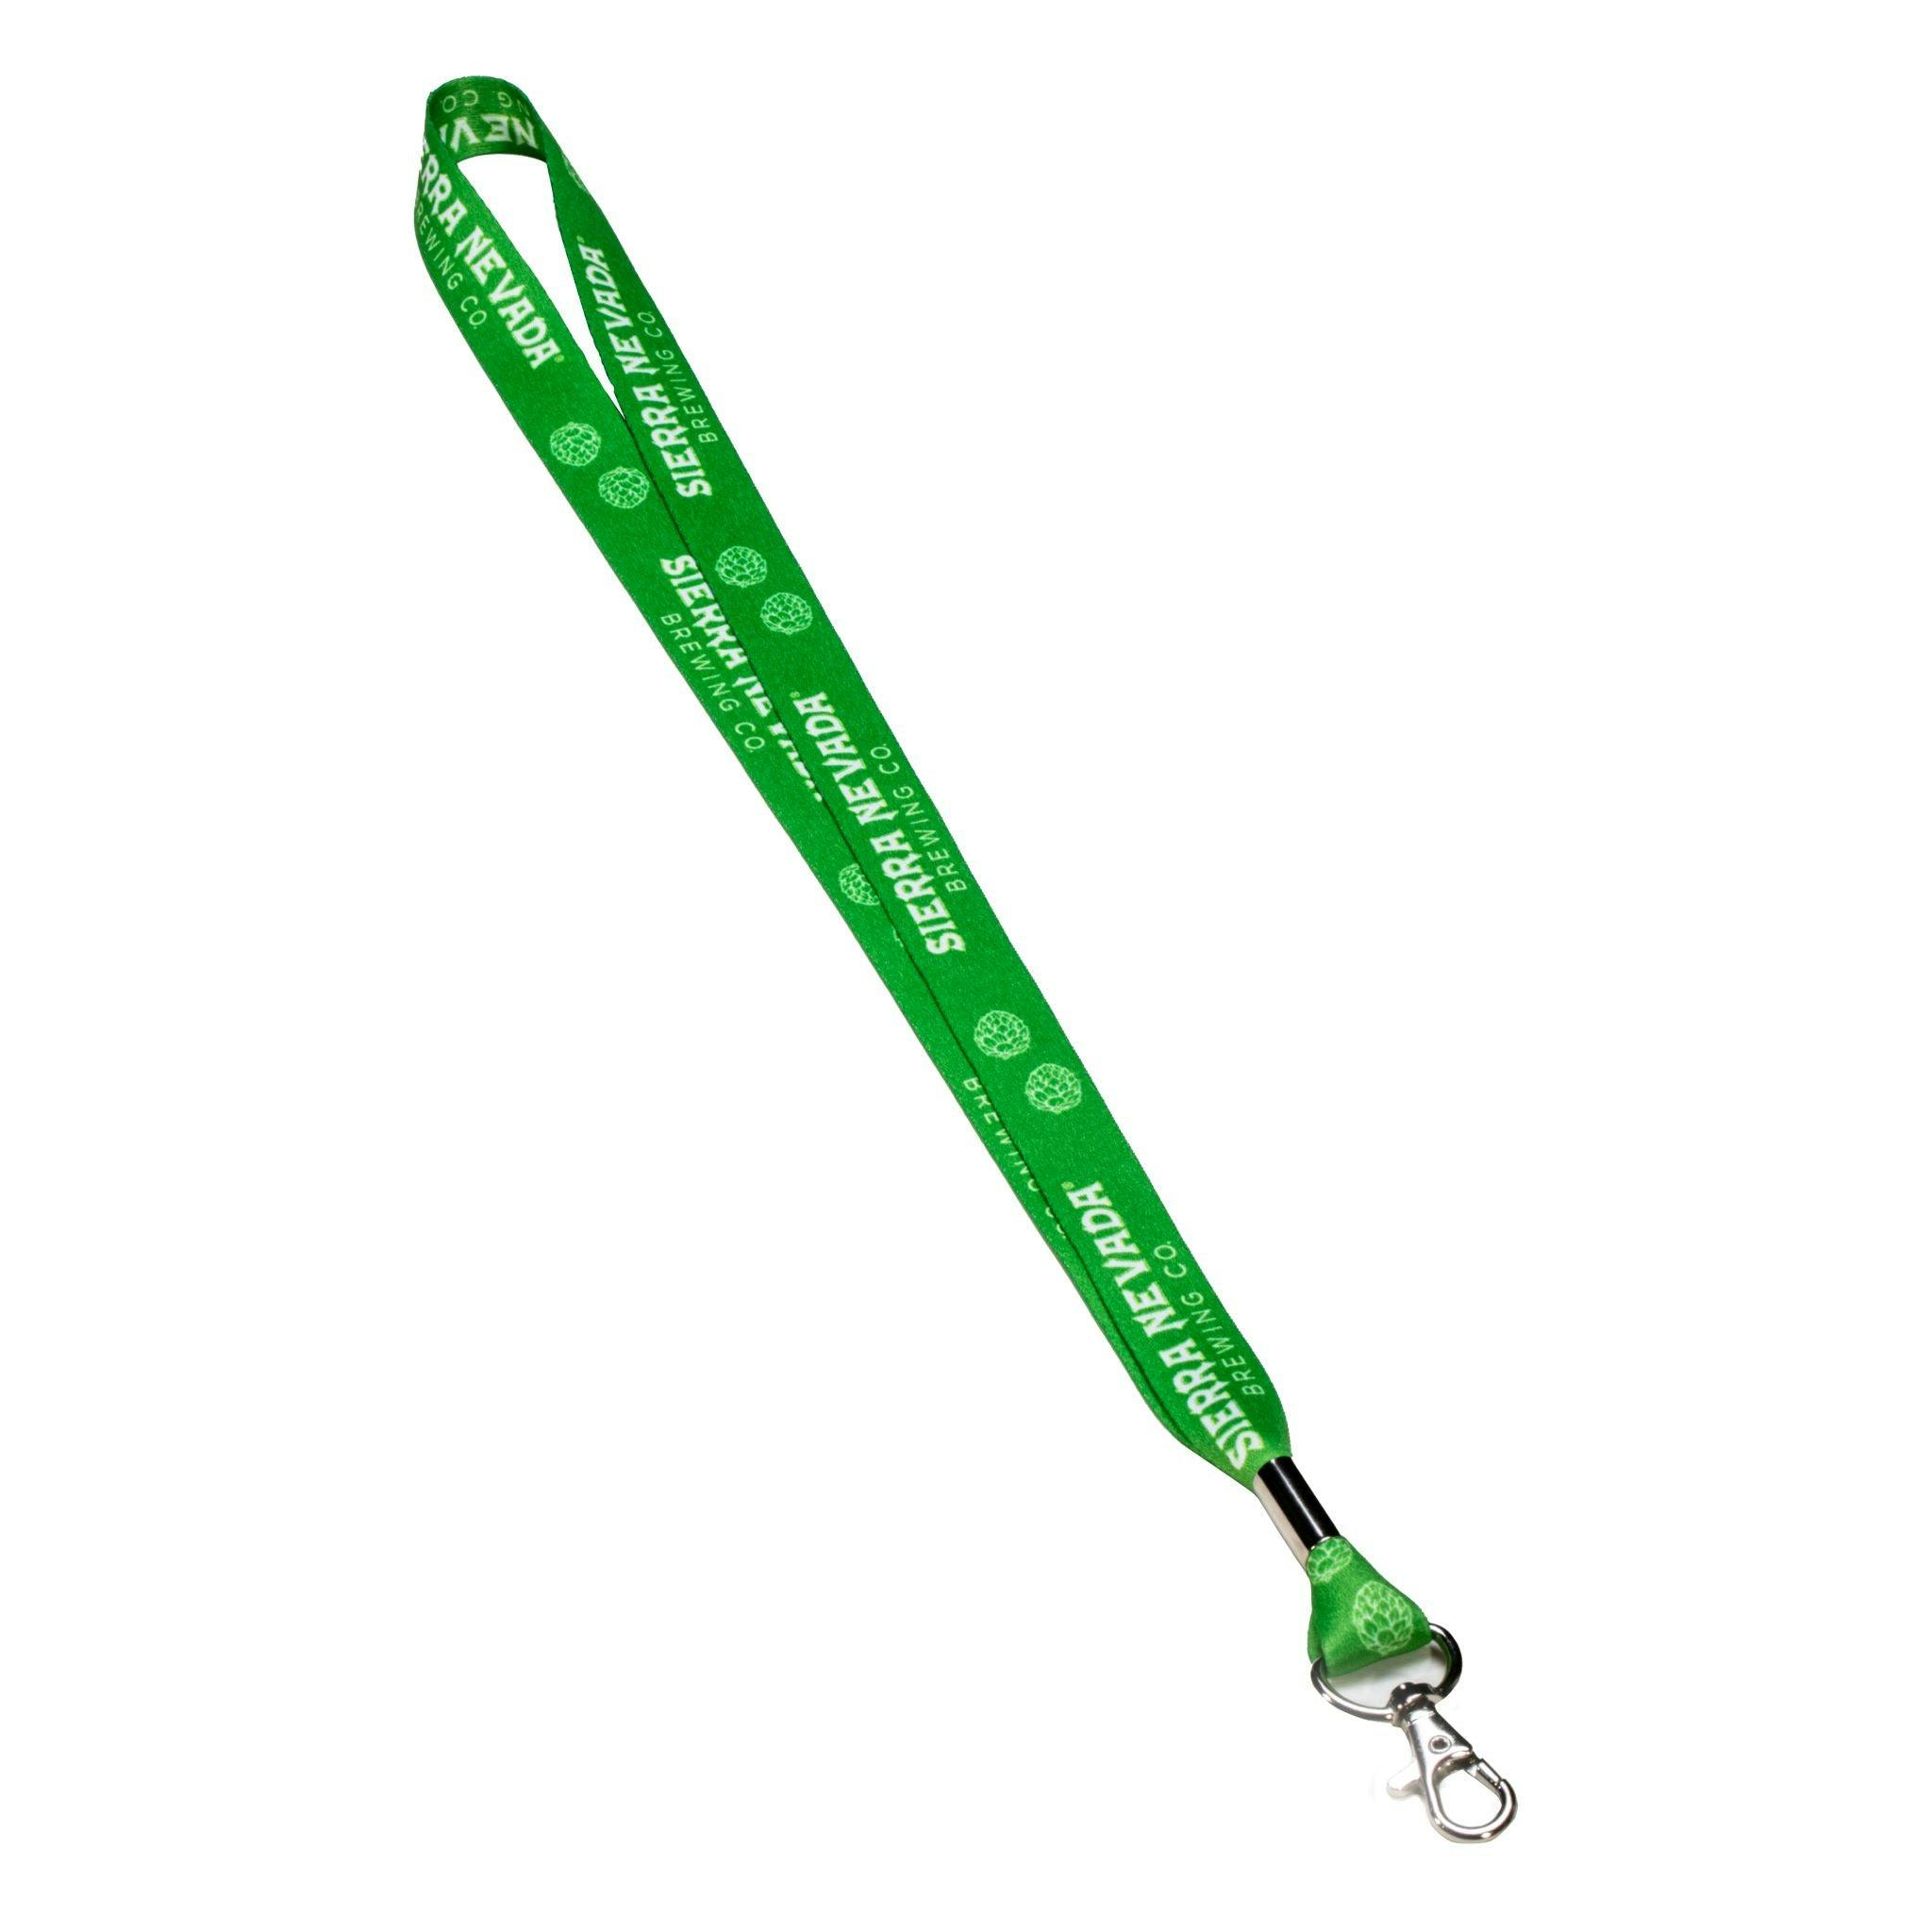 Sierra Nevada lanyard - view of the lanyard laid out straight with the clip visible at the end